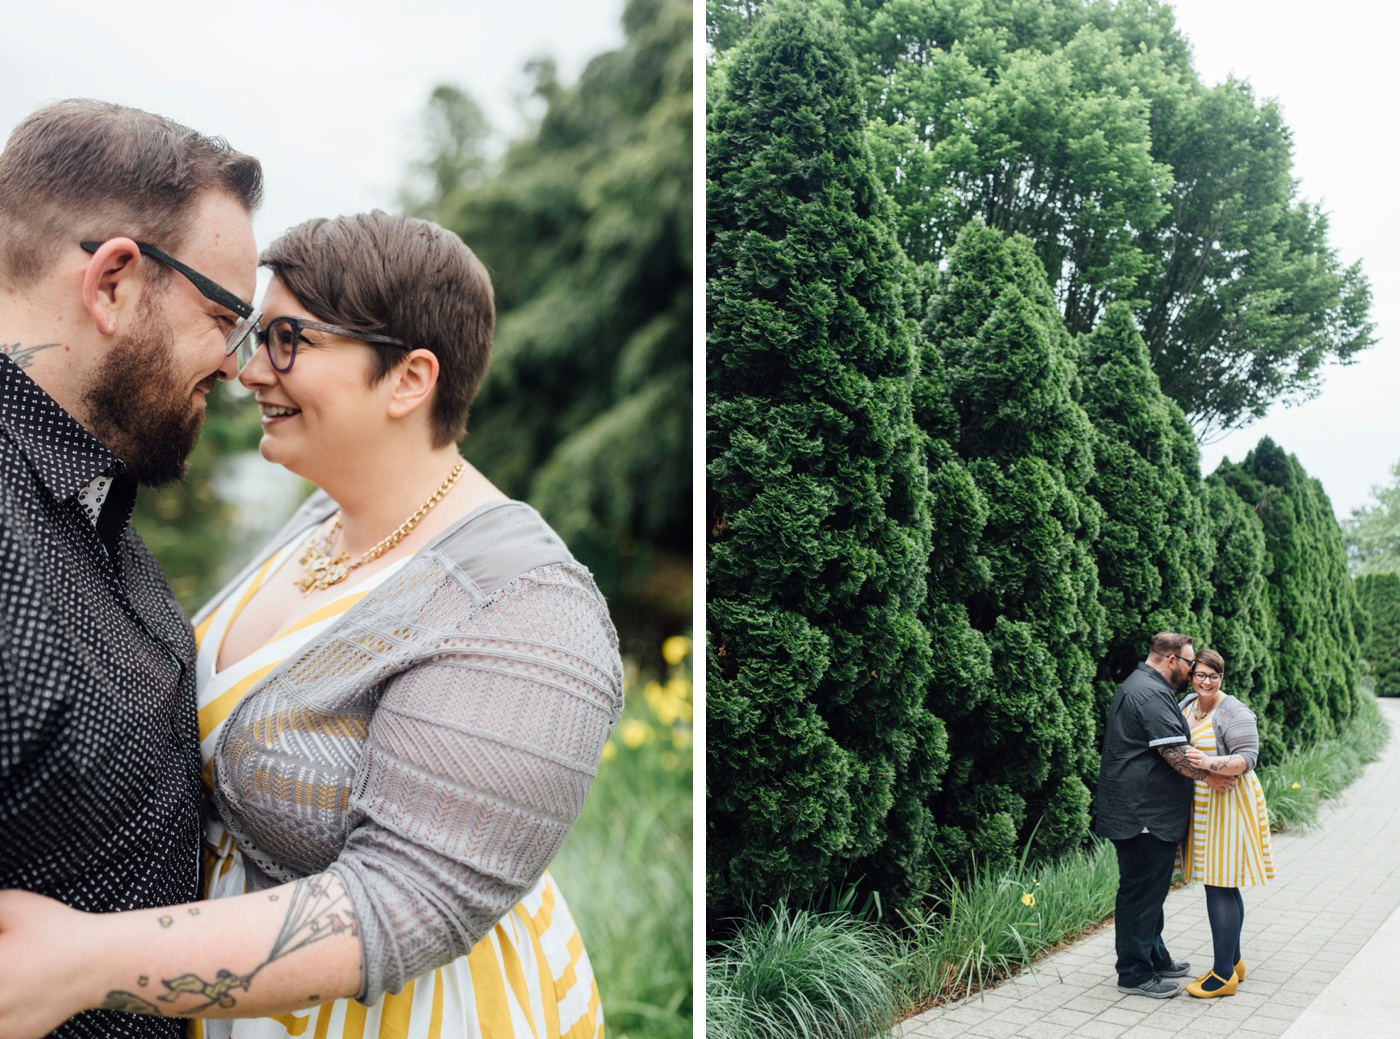 Erin + Tim - Grounds for Sculpture - Hamilton New Jersey Engagement Session - Alison Dunn Photography photo